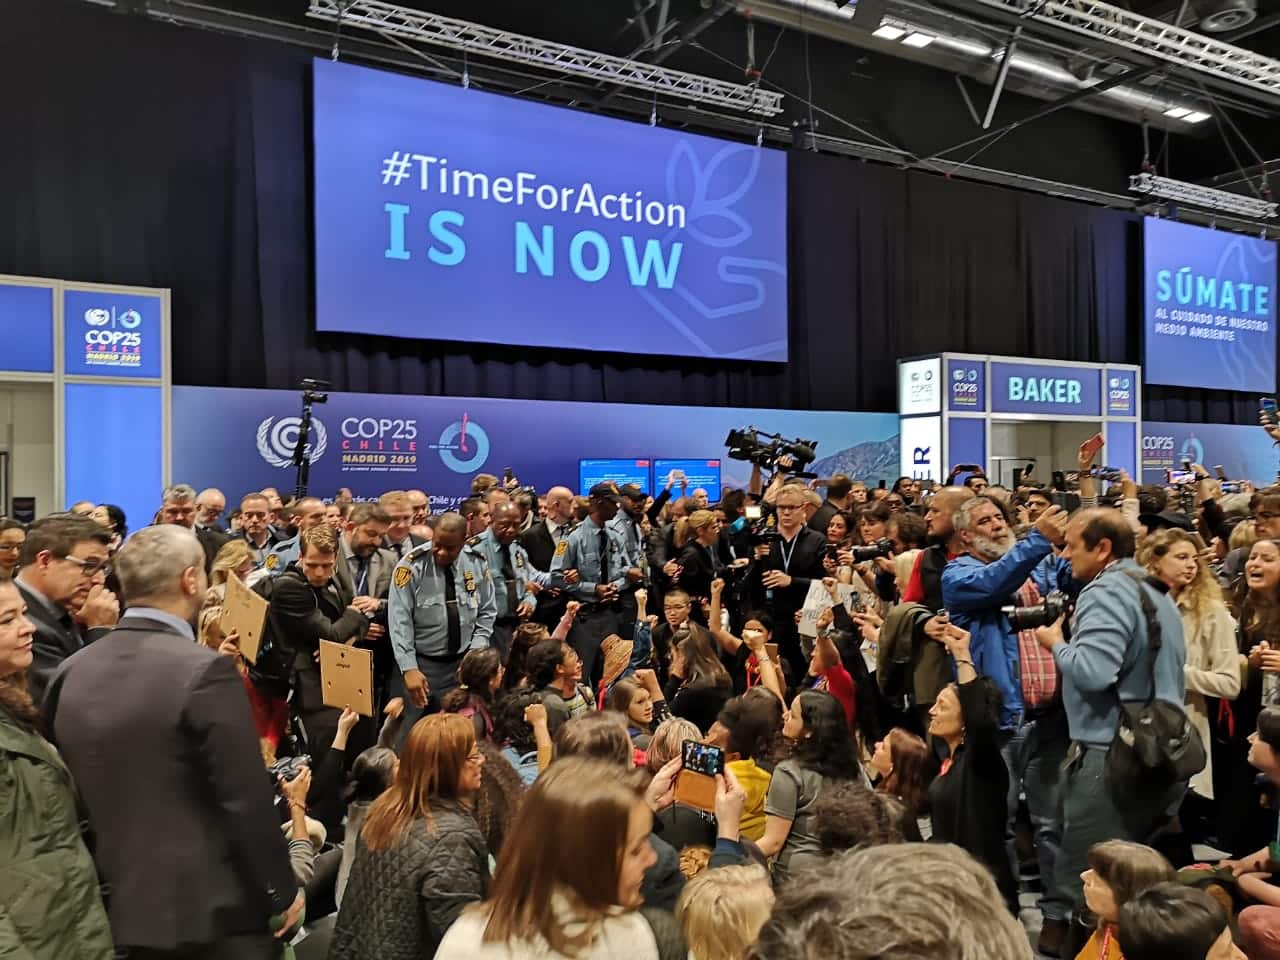 Protestors Kicked Out, Debadged at COP25 while Conference Welcomes Big Polluters